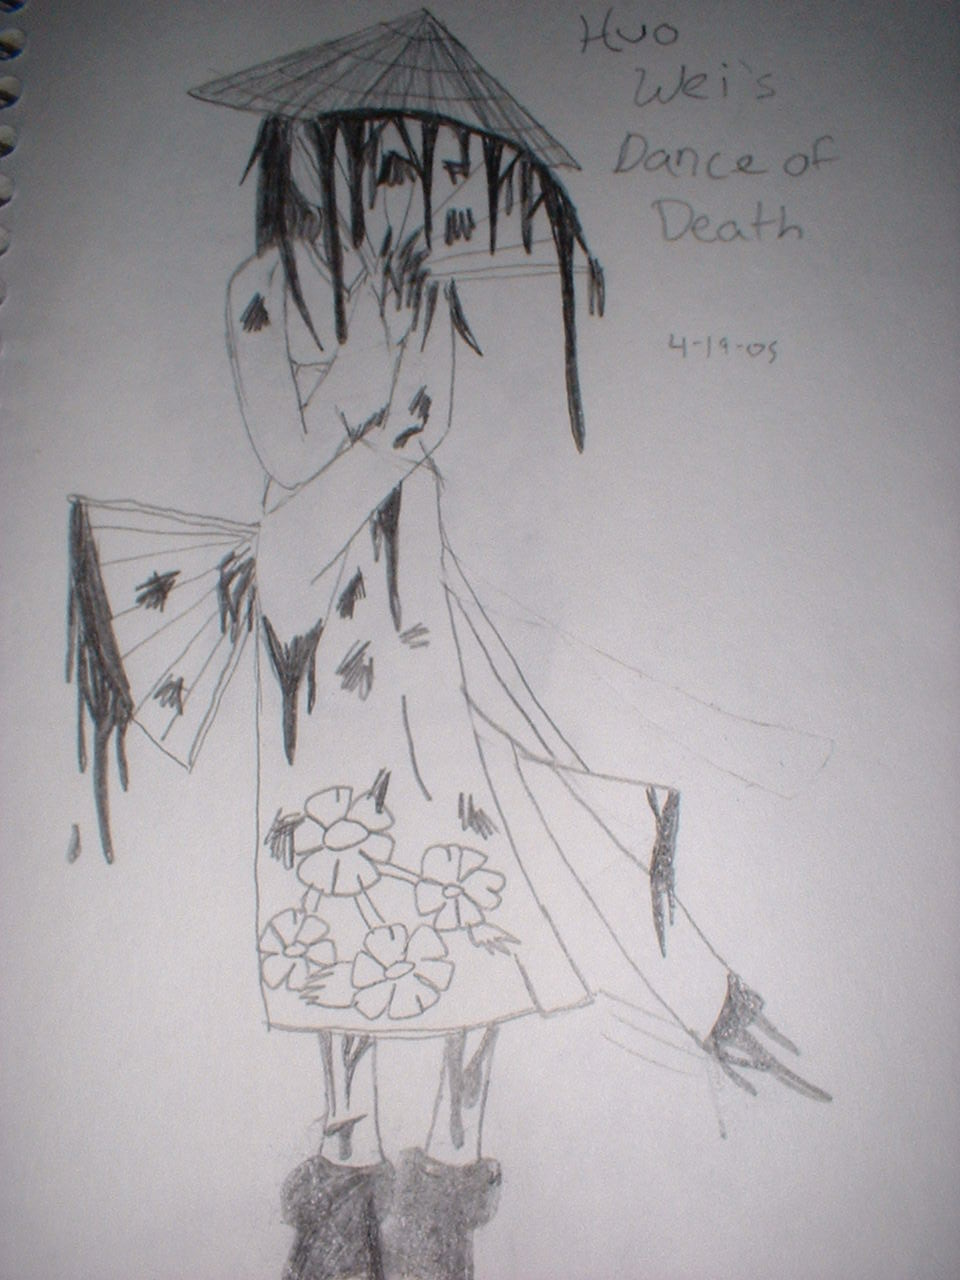 Dance of Death by katy